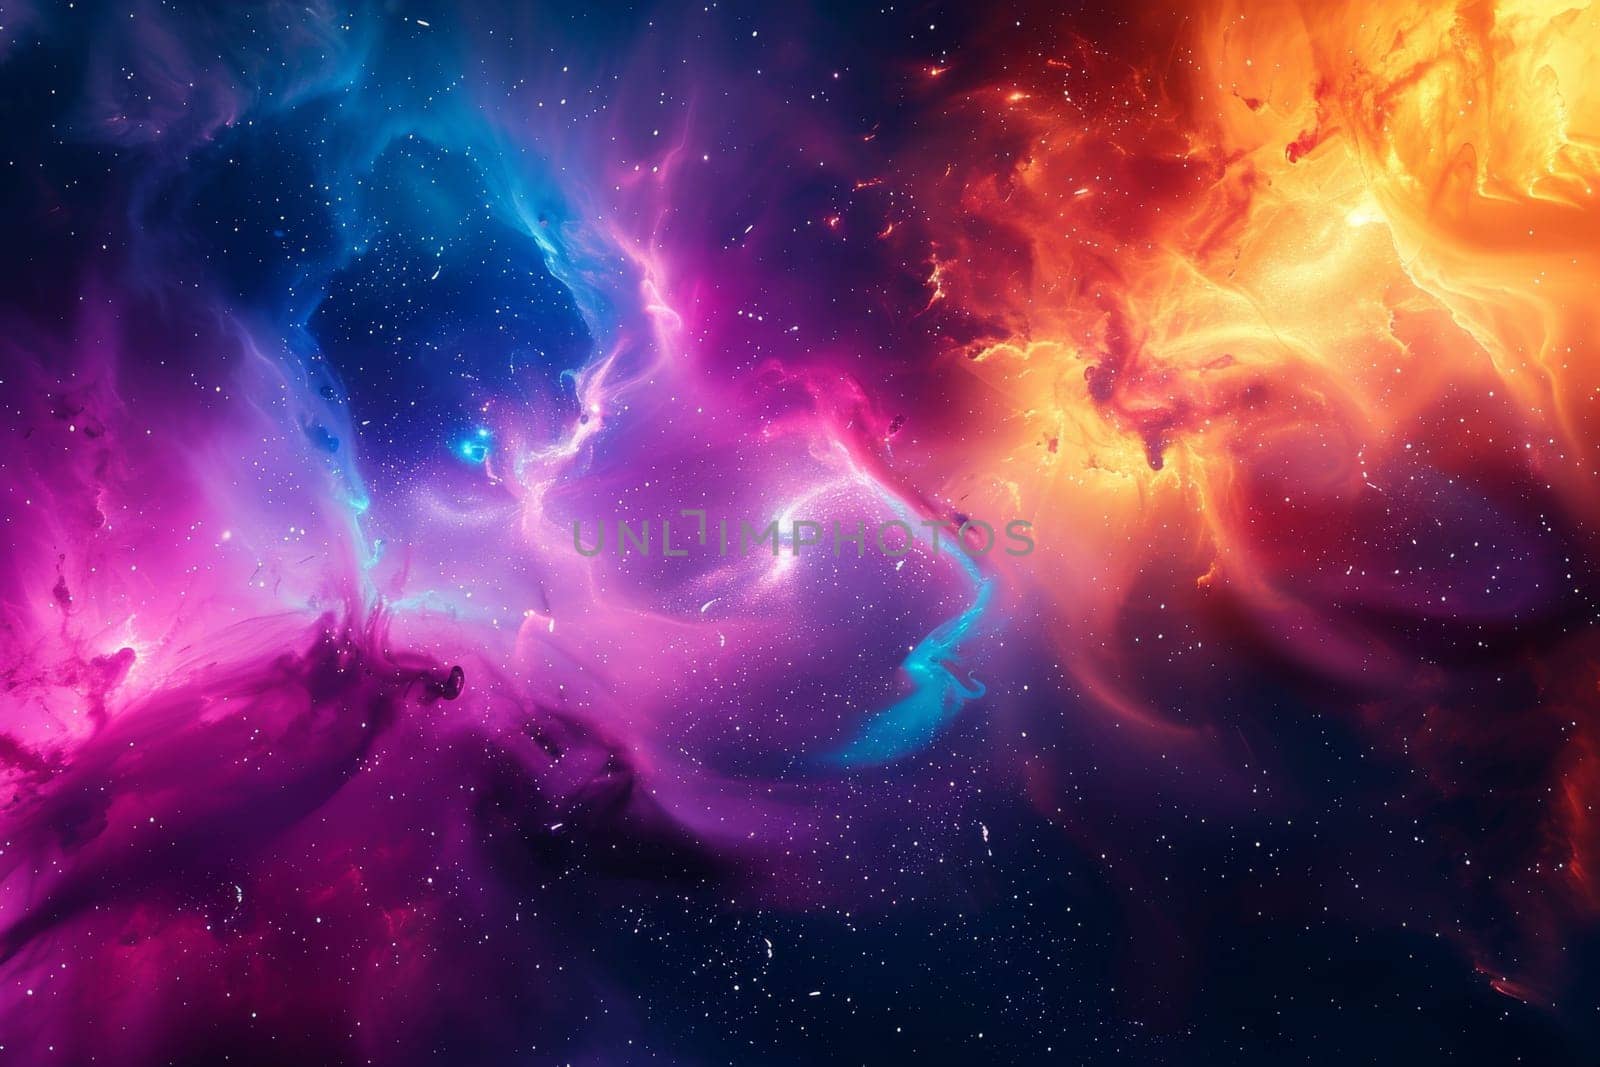 A colorful space scene with a purple cloud in the middle by itchaznong